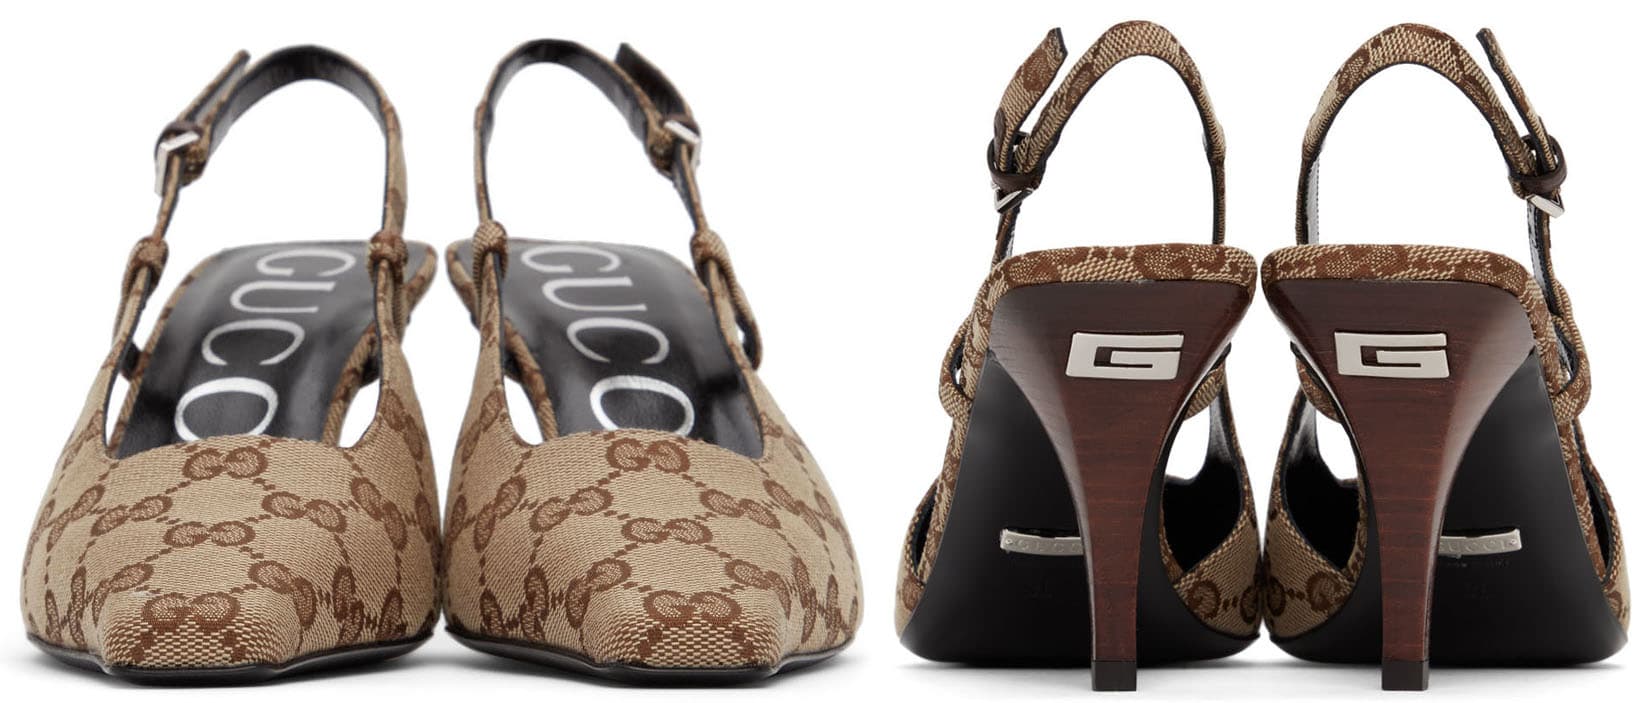 These Gucci slingback pumps are made of beige and brown canvas and feature Gucci's signature logo pattern, square toes, 3-inch heels